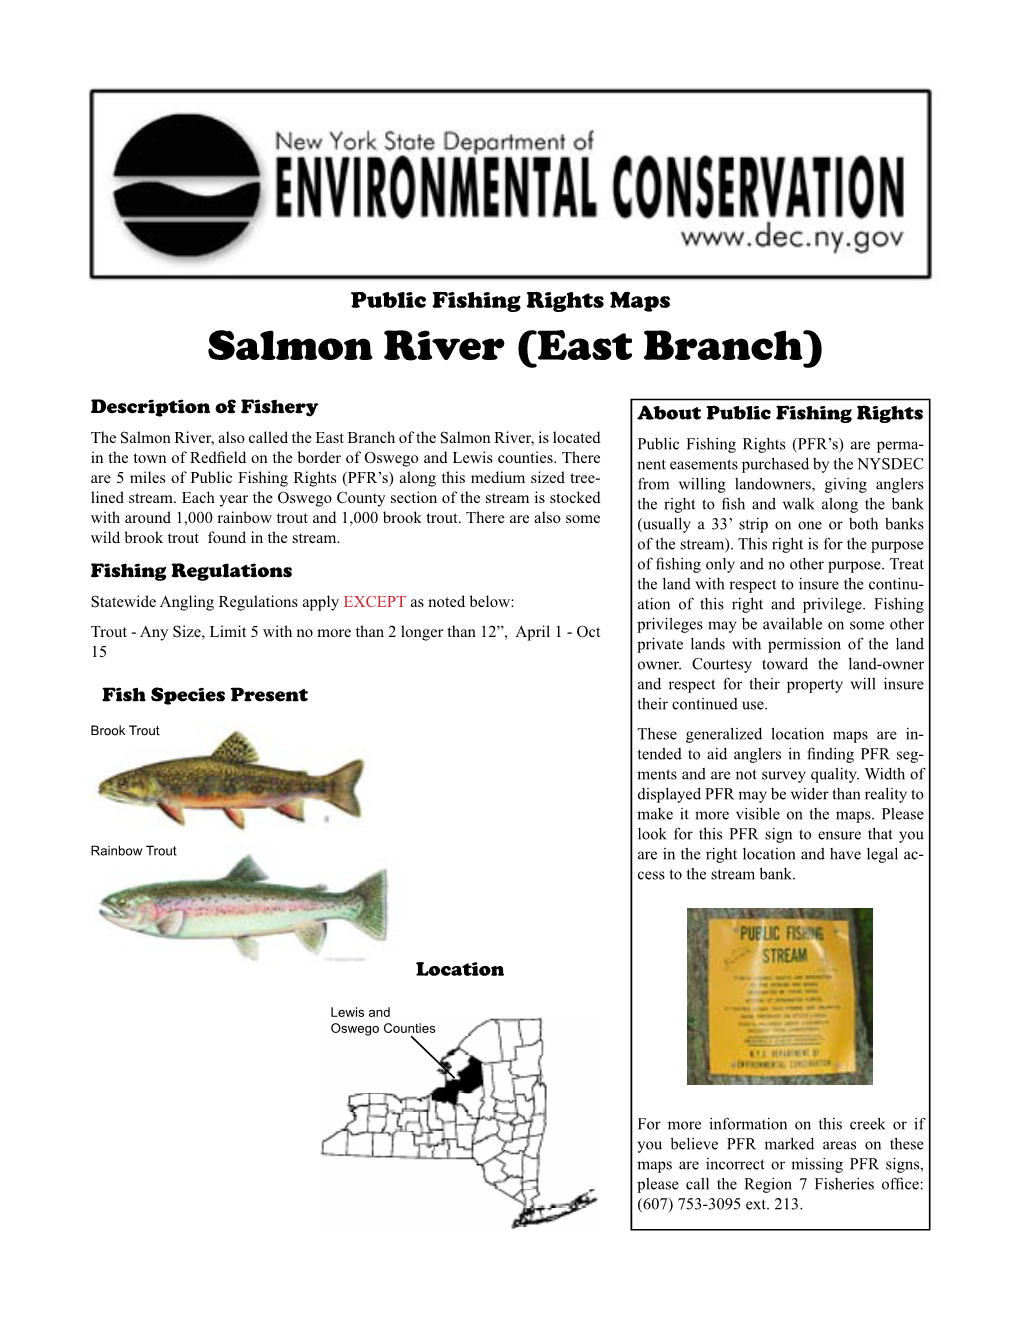 Salmon River (East Branch) Public Fishing Rights Brochure